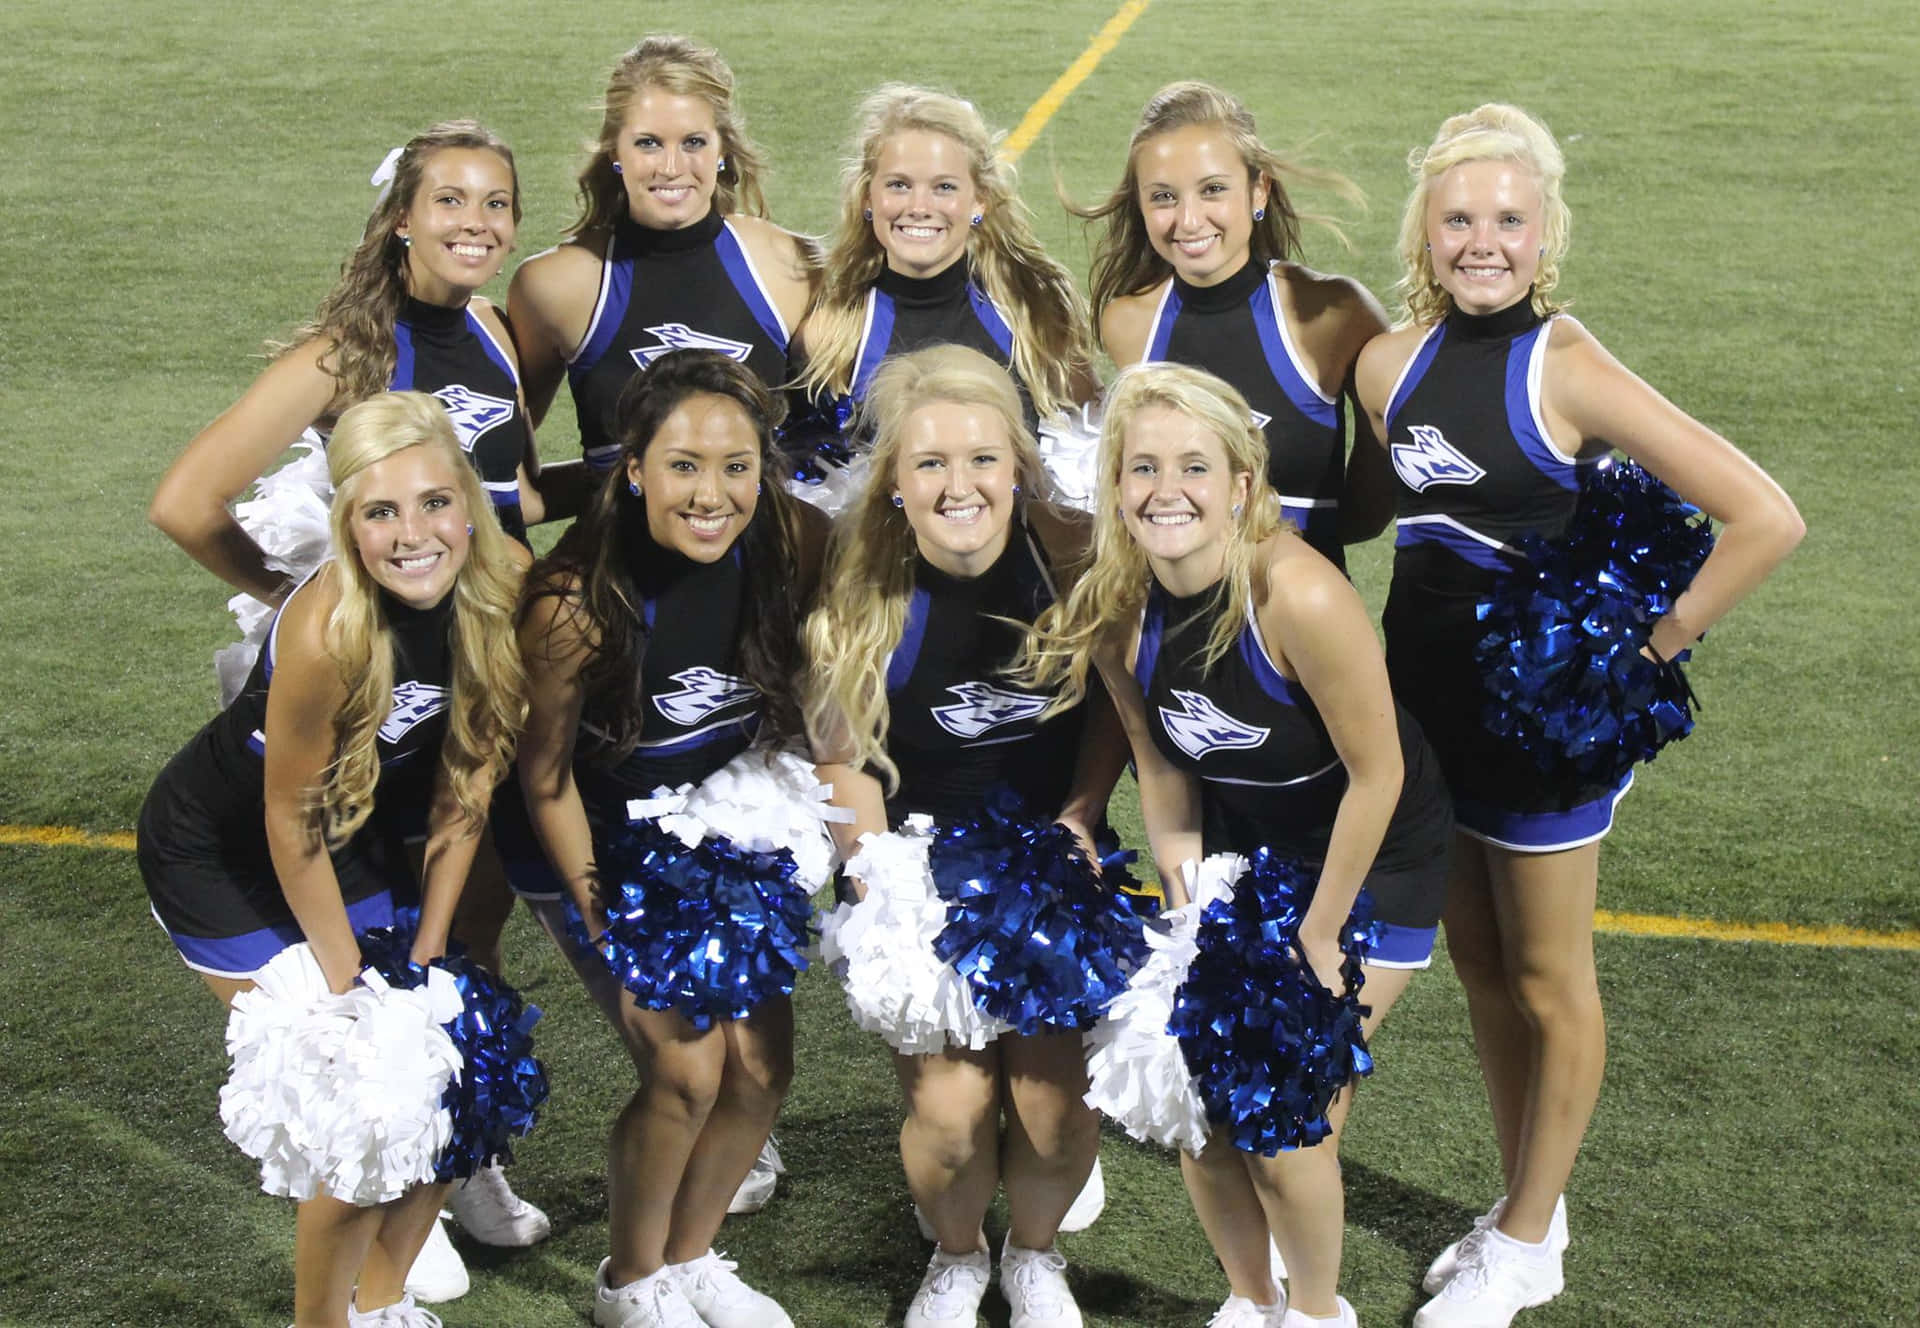 Cheerleaders Show Us What It Means To Be A Team